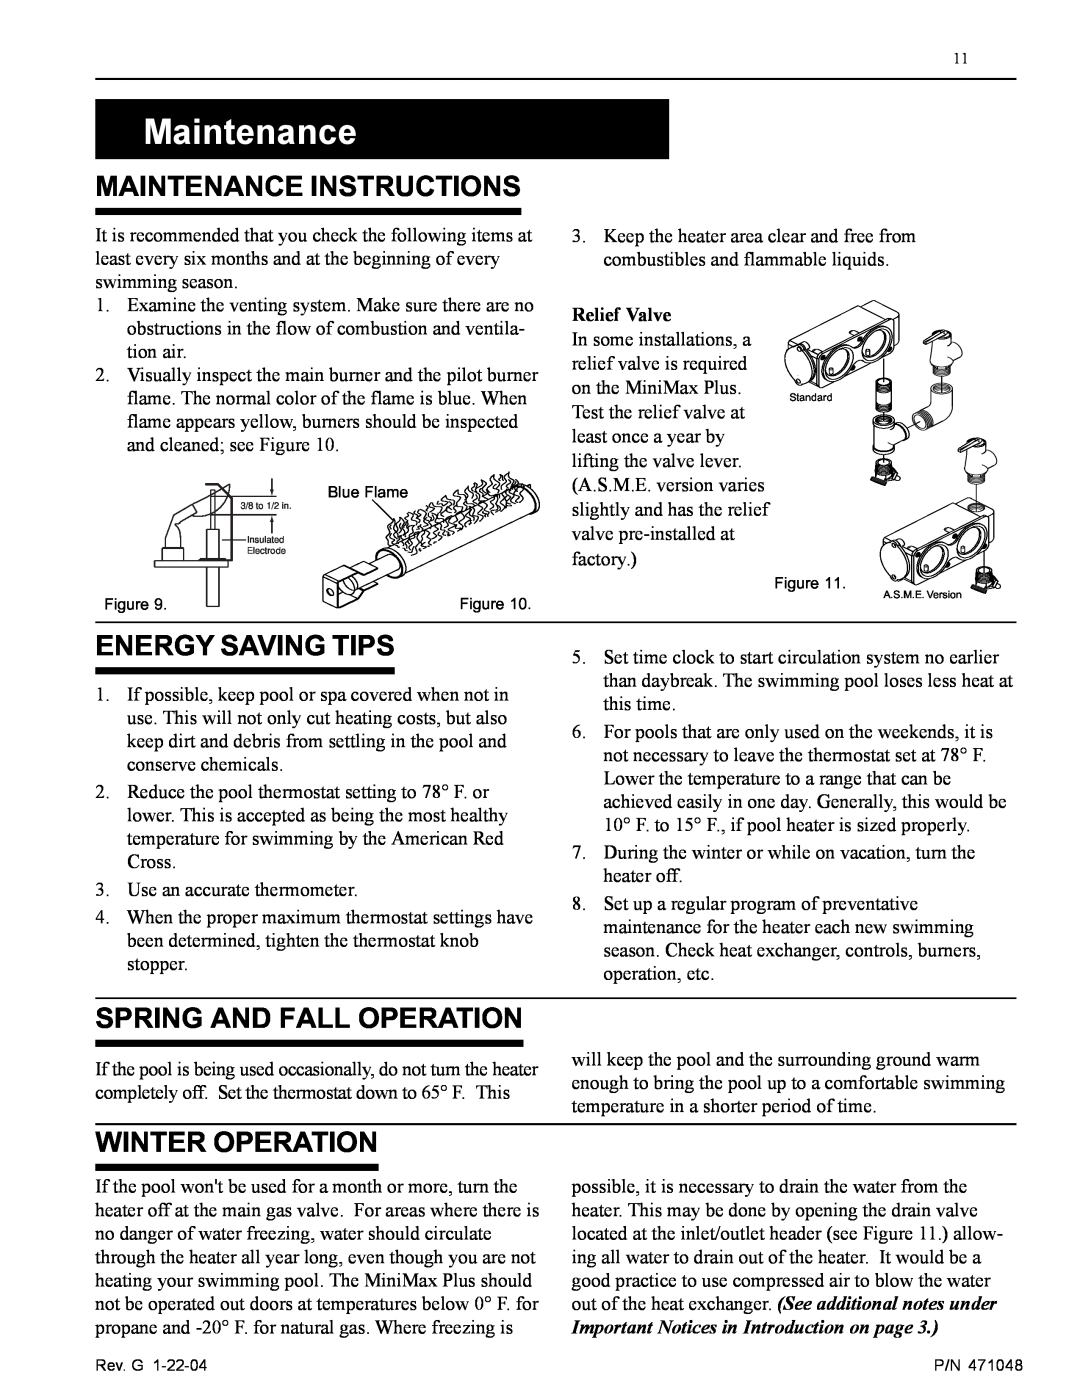 Pentair MiniMax Plus HP Series Maintenance Instructions, Energy Saving Tips, Spring And Fall Operation, Relief Valve 